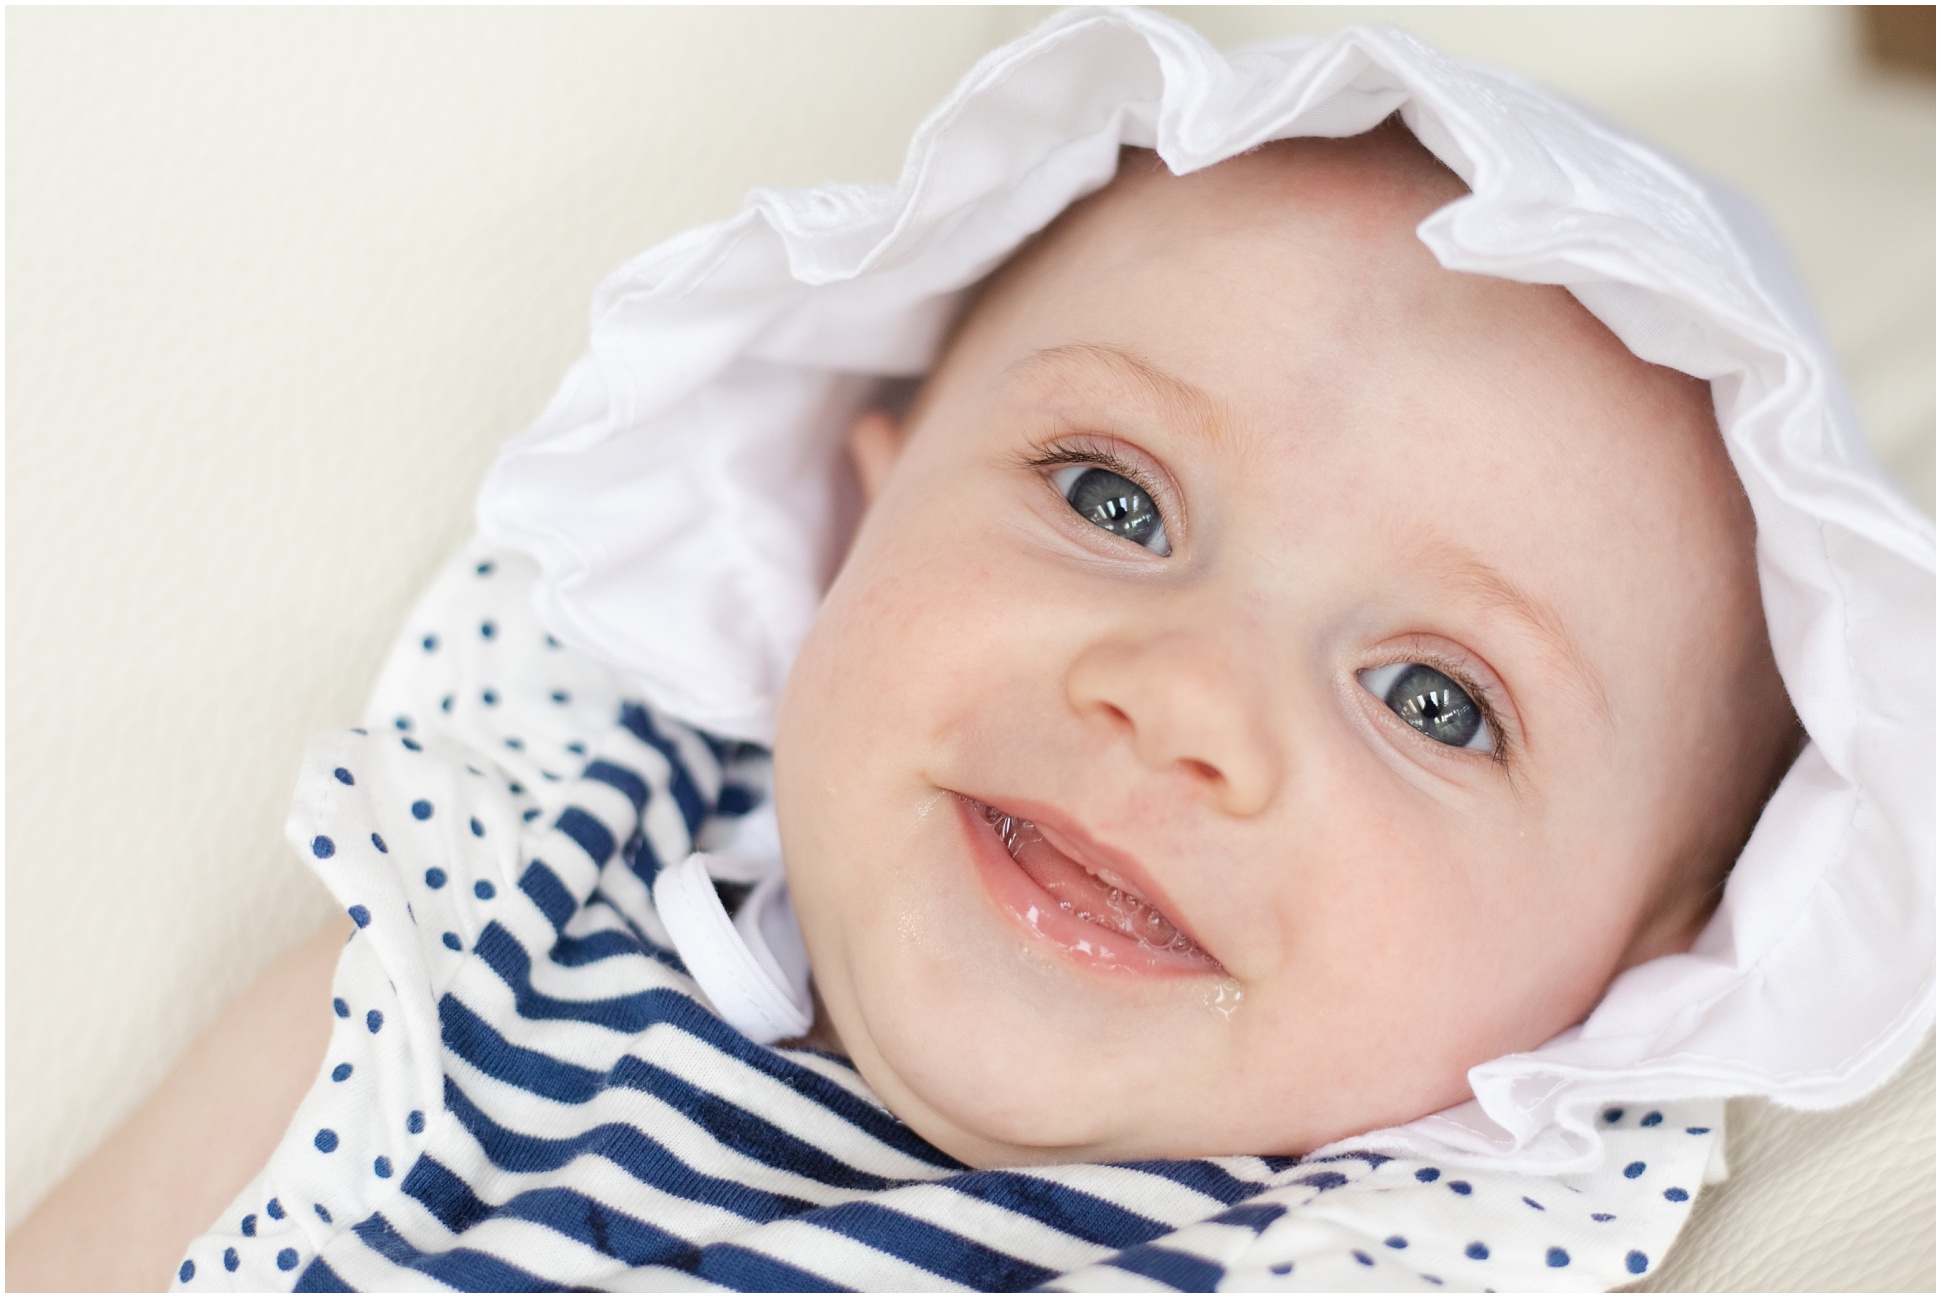 Baby wearing a white bonnet and smiling at the camera